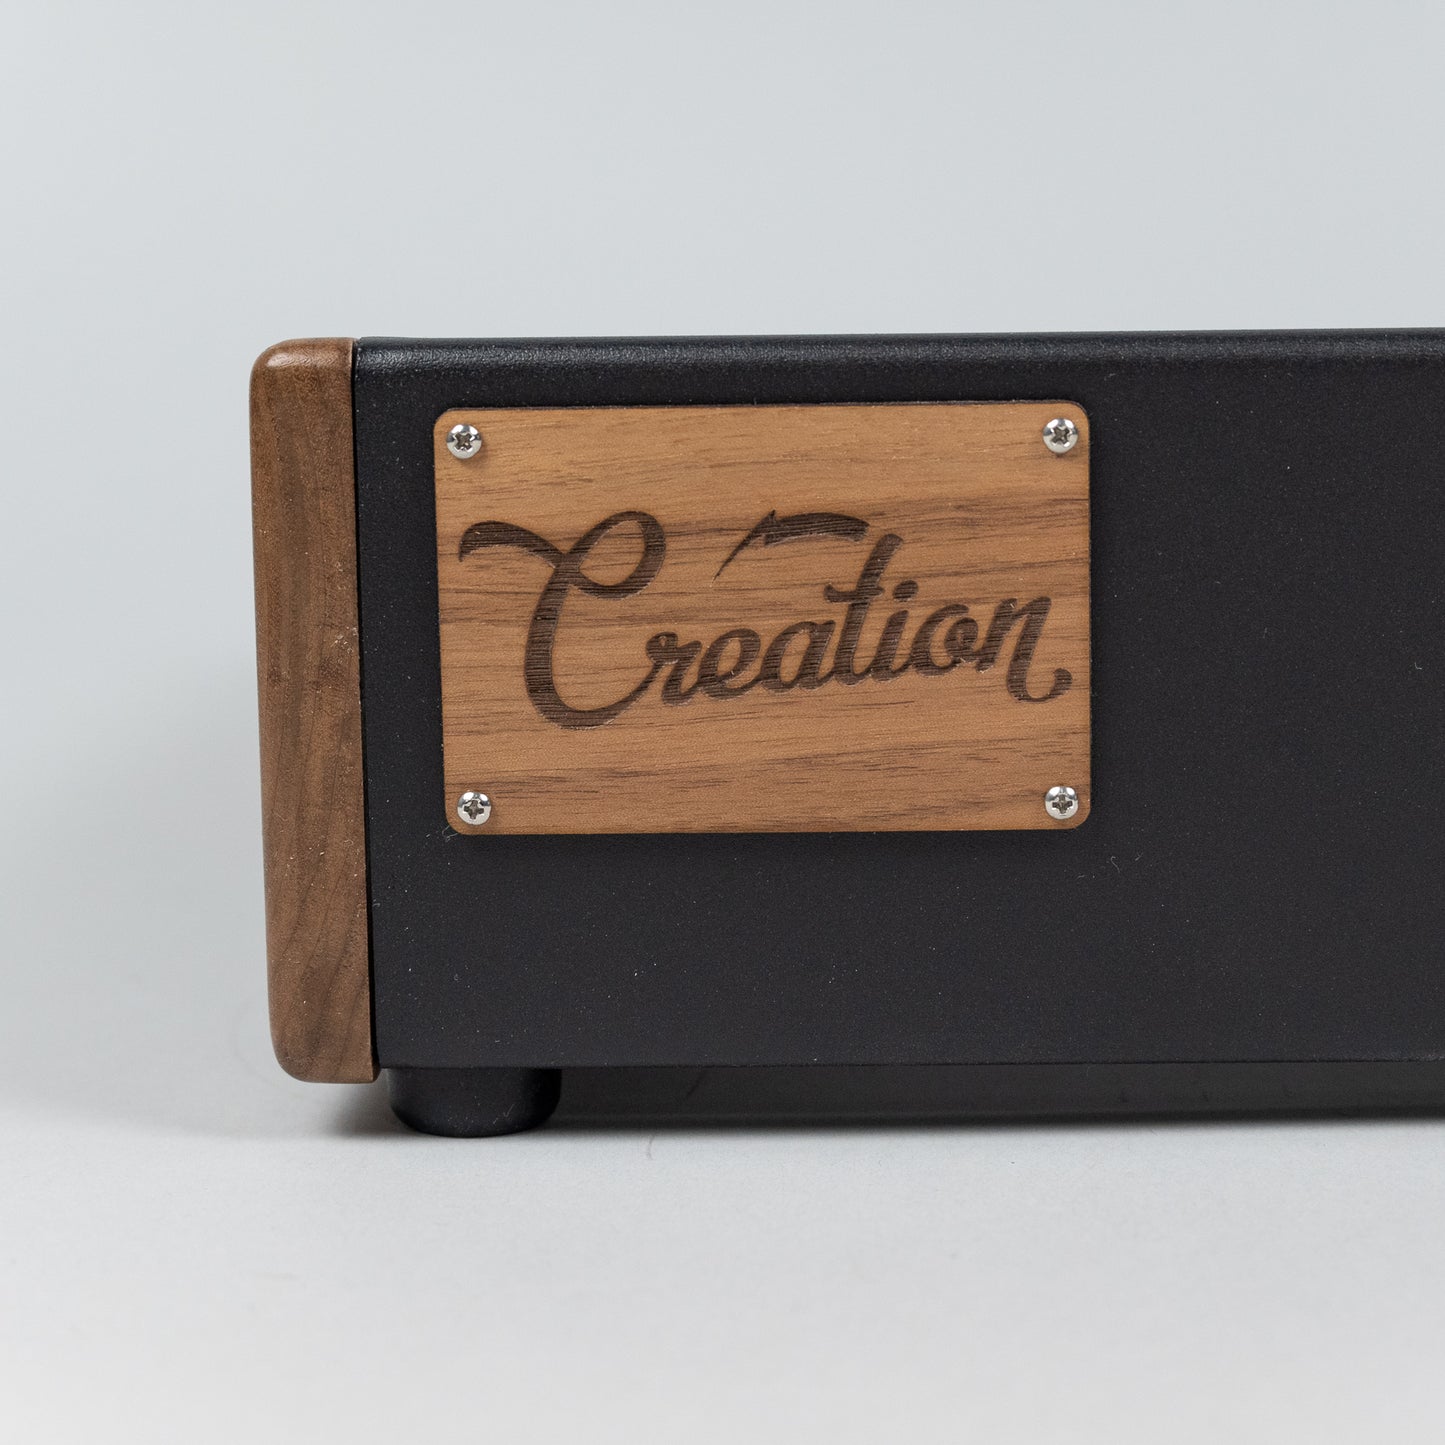 Creation Music Company Elevation Series V2 Pedalboard 18x12.5